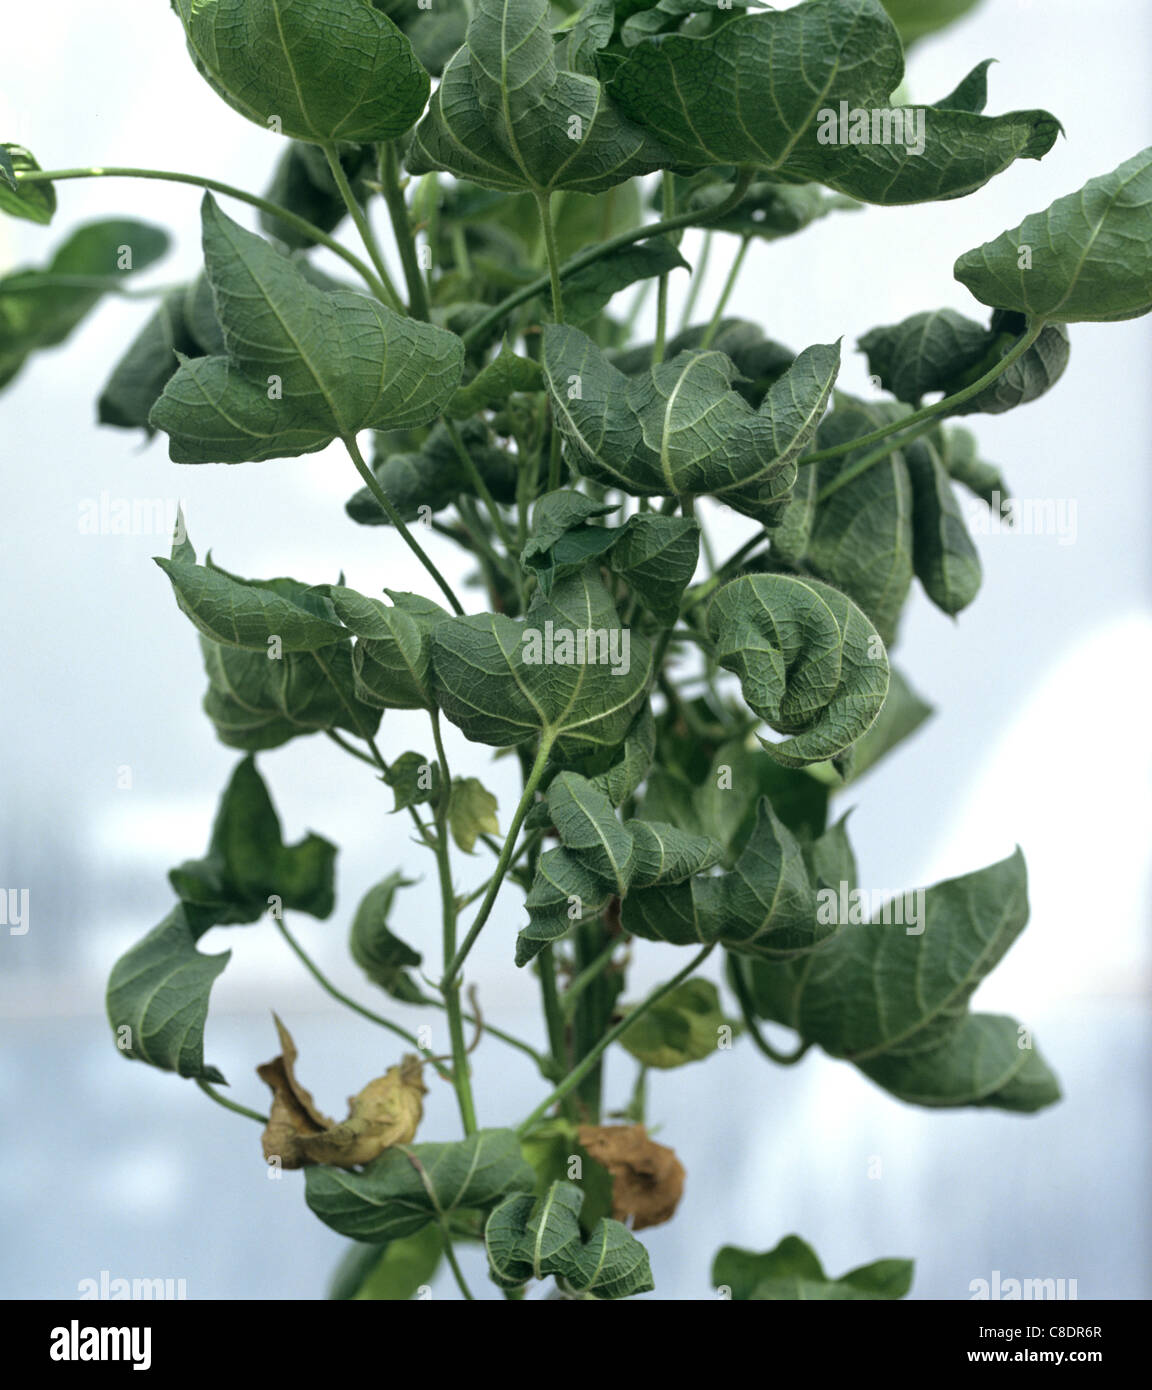 Damage caused by cotton leaf curl virus on cotton plant Stock Photo